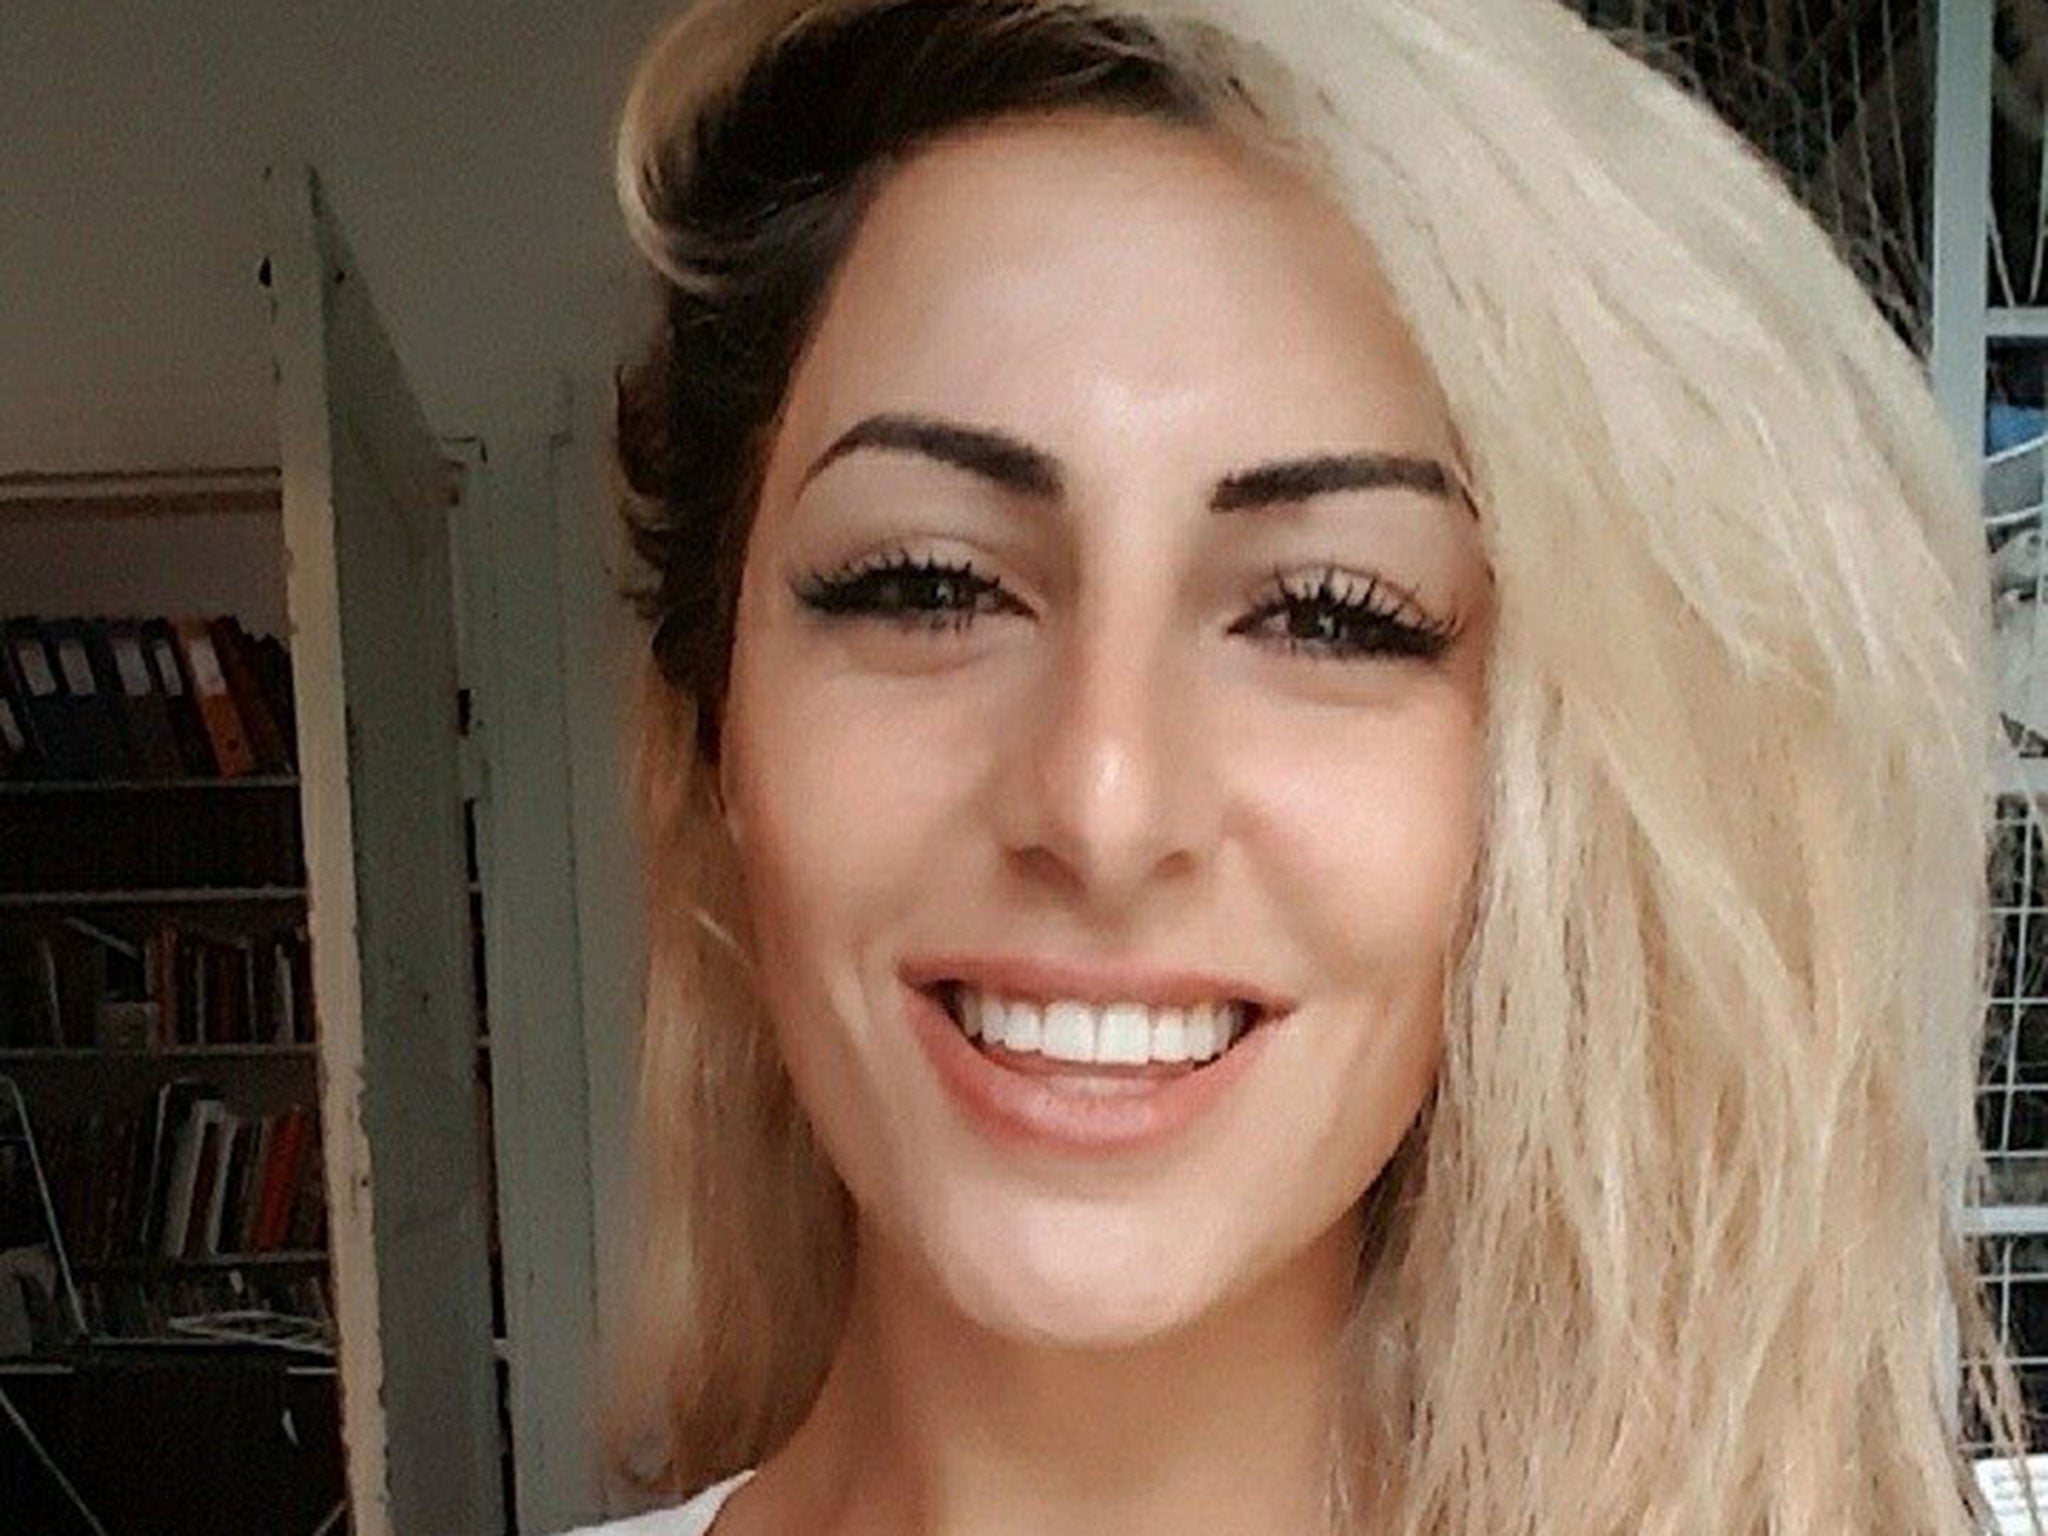 Joanna Palani, a Danish-Kurdish woman, left her politics and philosophy degree to fight against Isis in Syria and Iraq